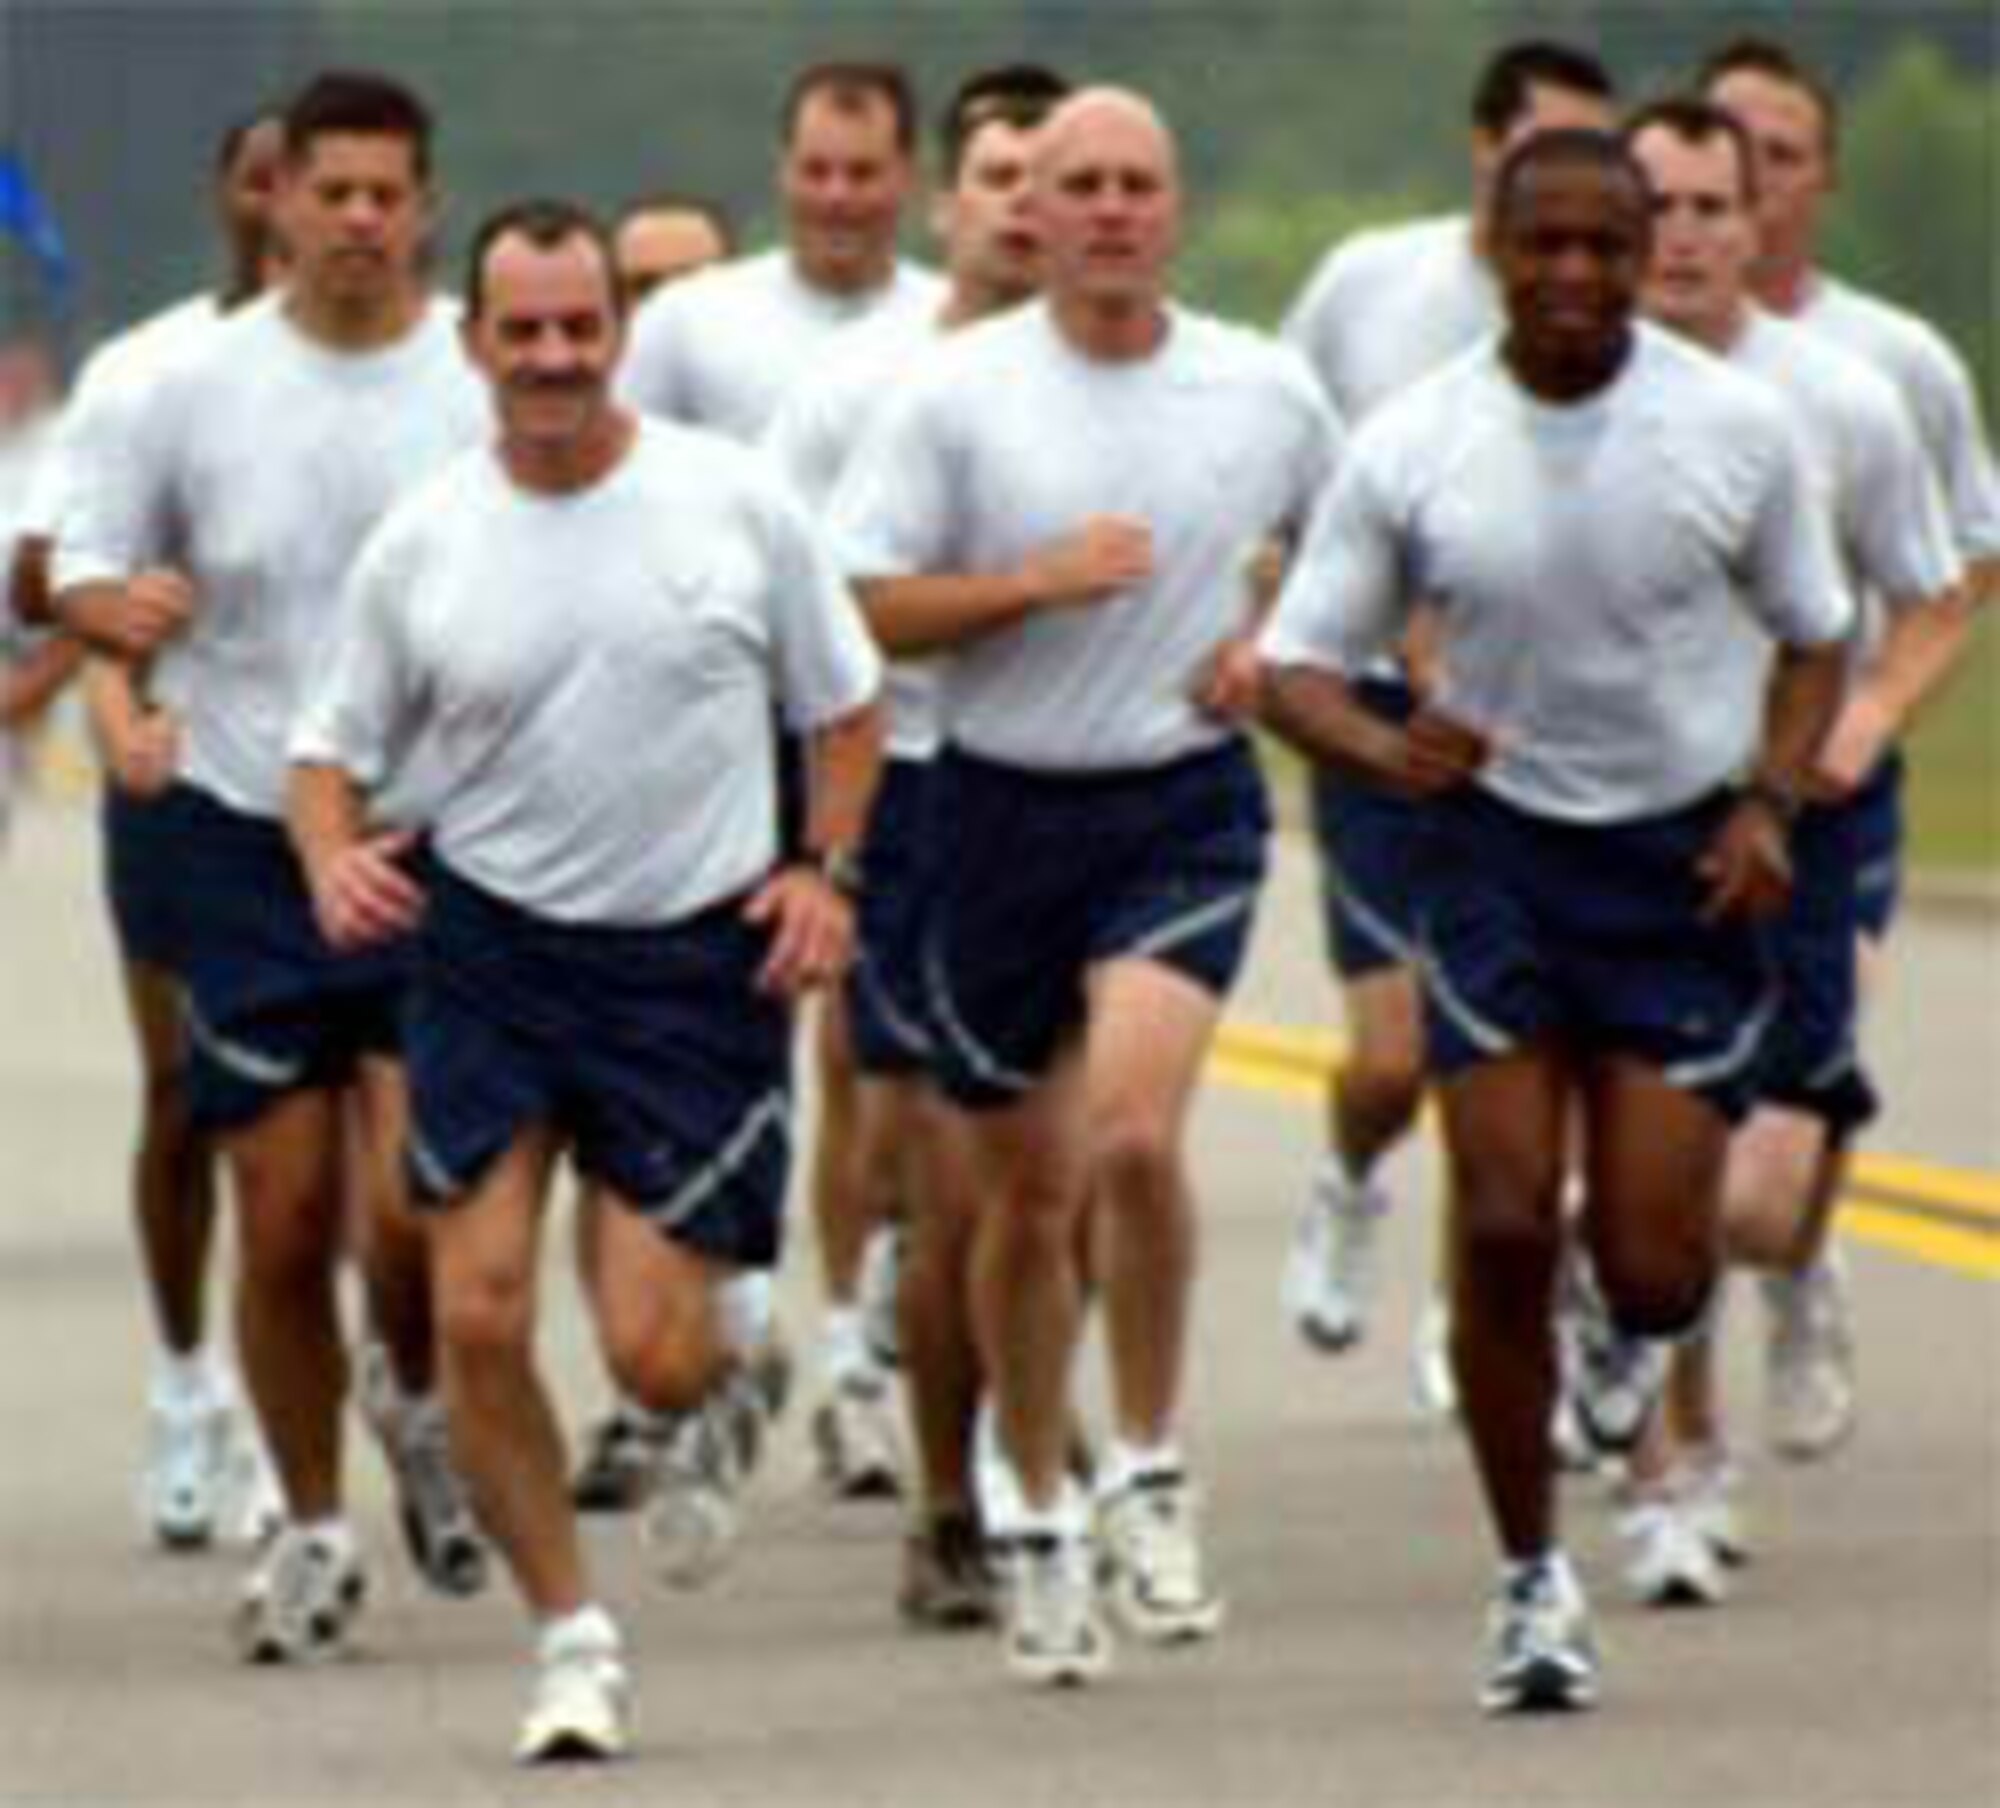 Command Chief Master Sgt. Herb Hanson and Brig. Gen. Darren McDew lead the pack as Team Pope returns from a formation run that kicked off Wingman Day May 25.